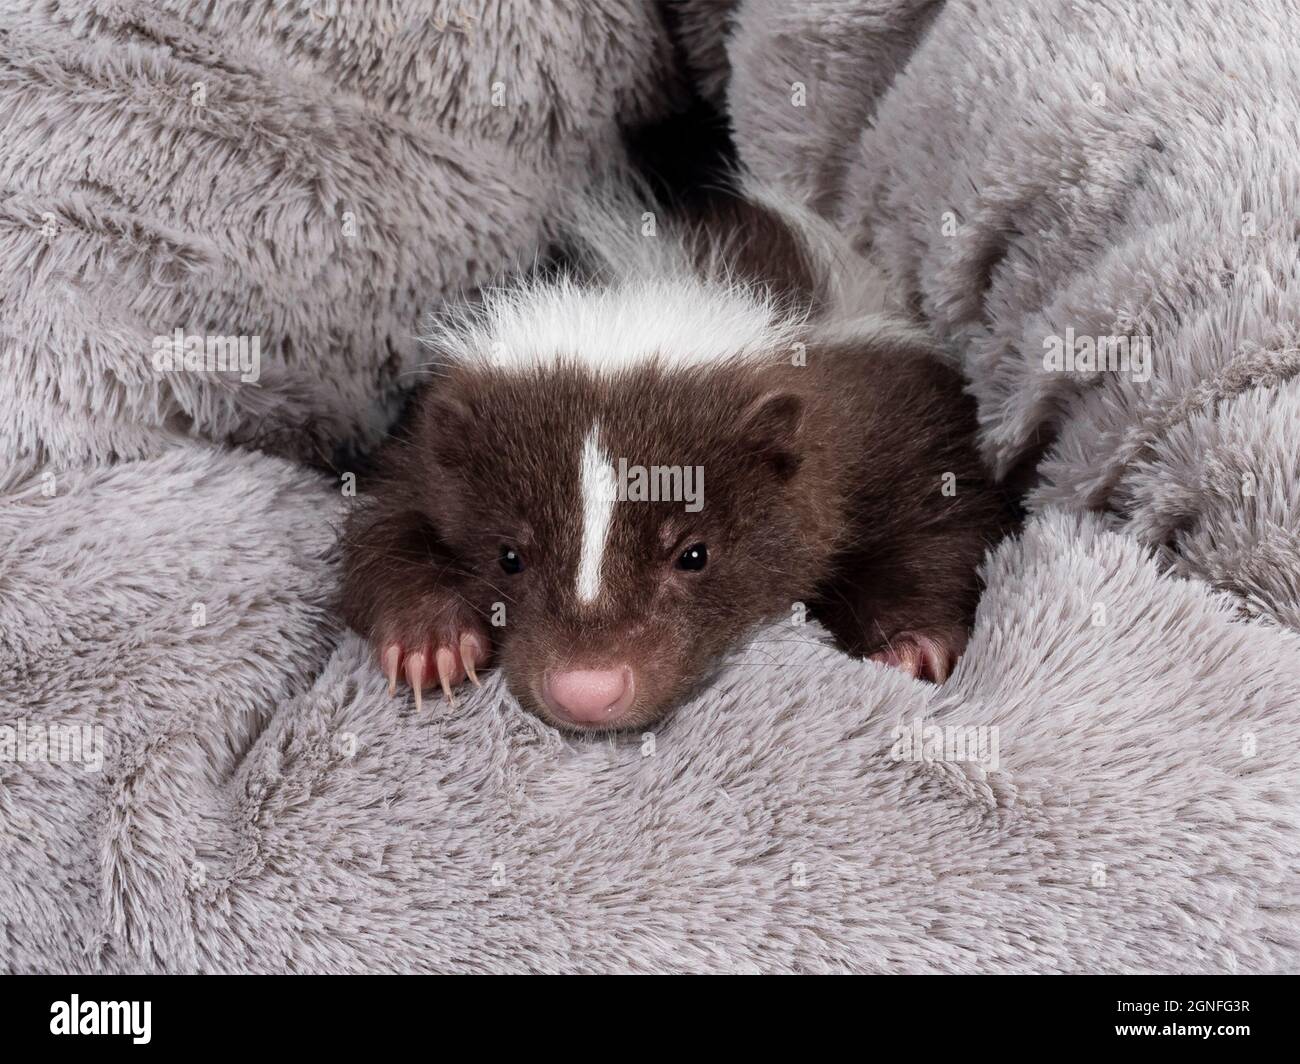 Full frame shot of cute brown with white striped baby skunk, peeping out of a grey fluffy basket Looking towards camera. Isolated on a white backgroun Stock Photo